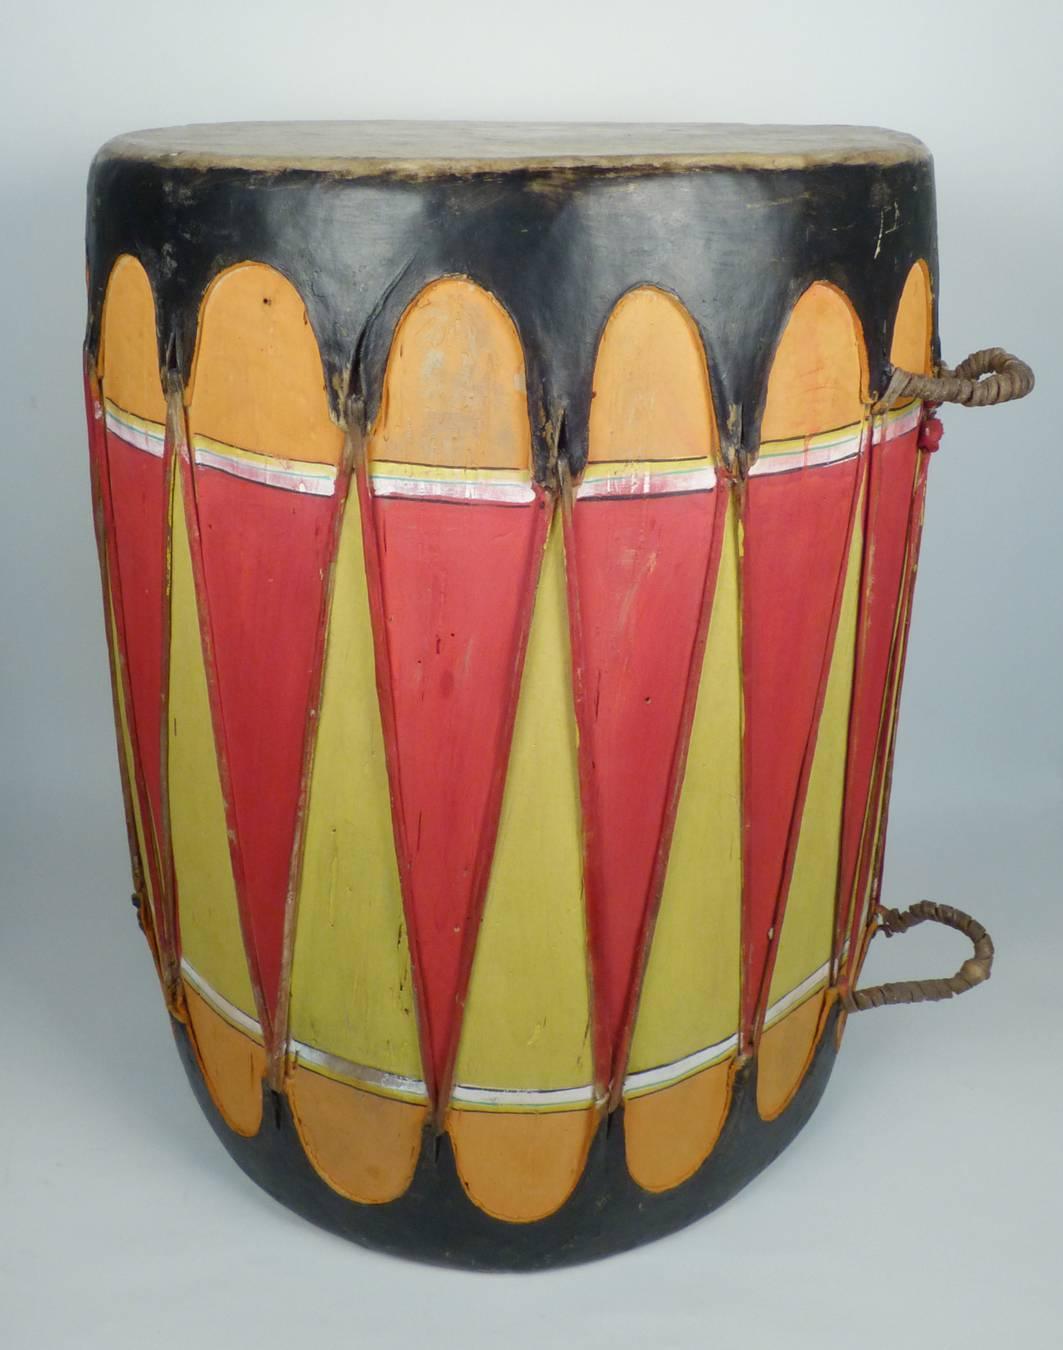 This hand-painted vintage drum was most likely made in the 1940s in Cochiti Pueblo and adds a fun splash of color to any room. Solid wood body and stretched hide drum head. Measures: 17 3/4" x 13".